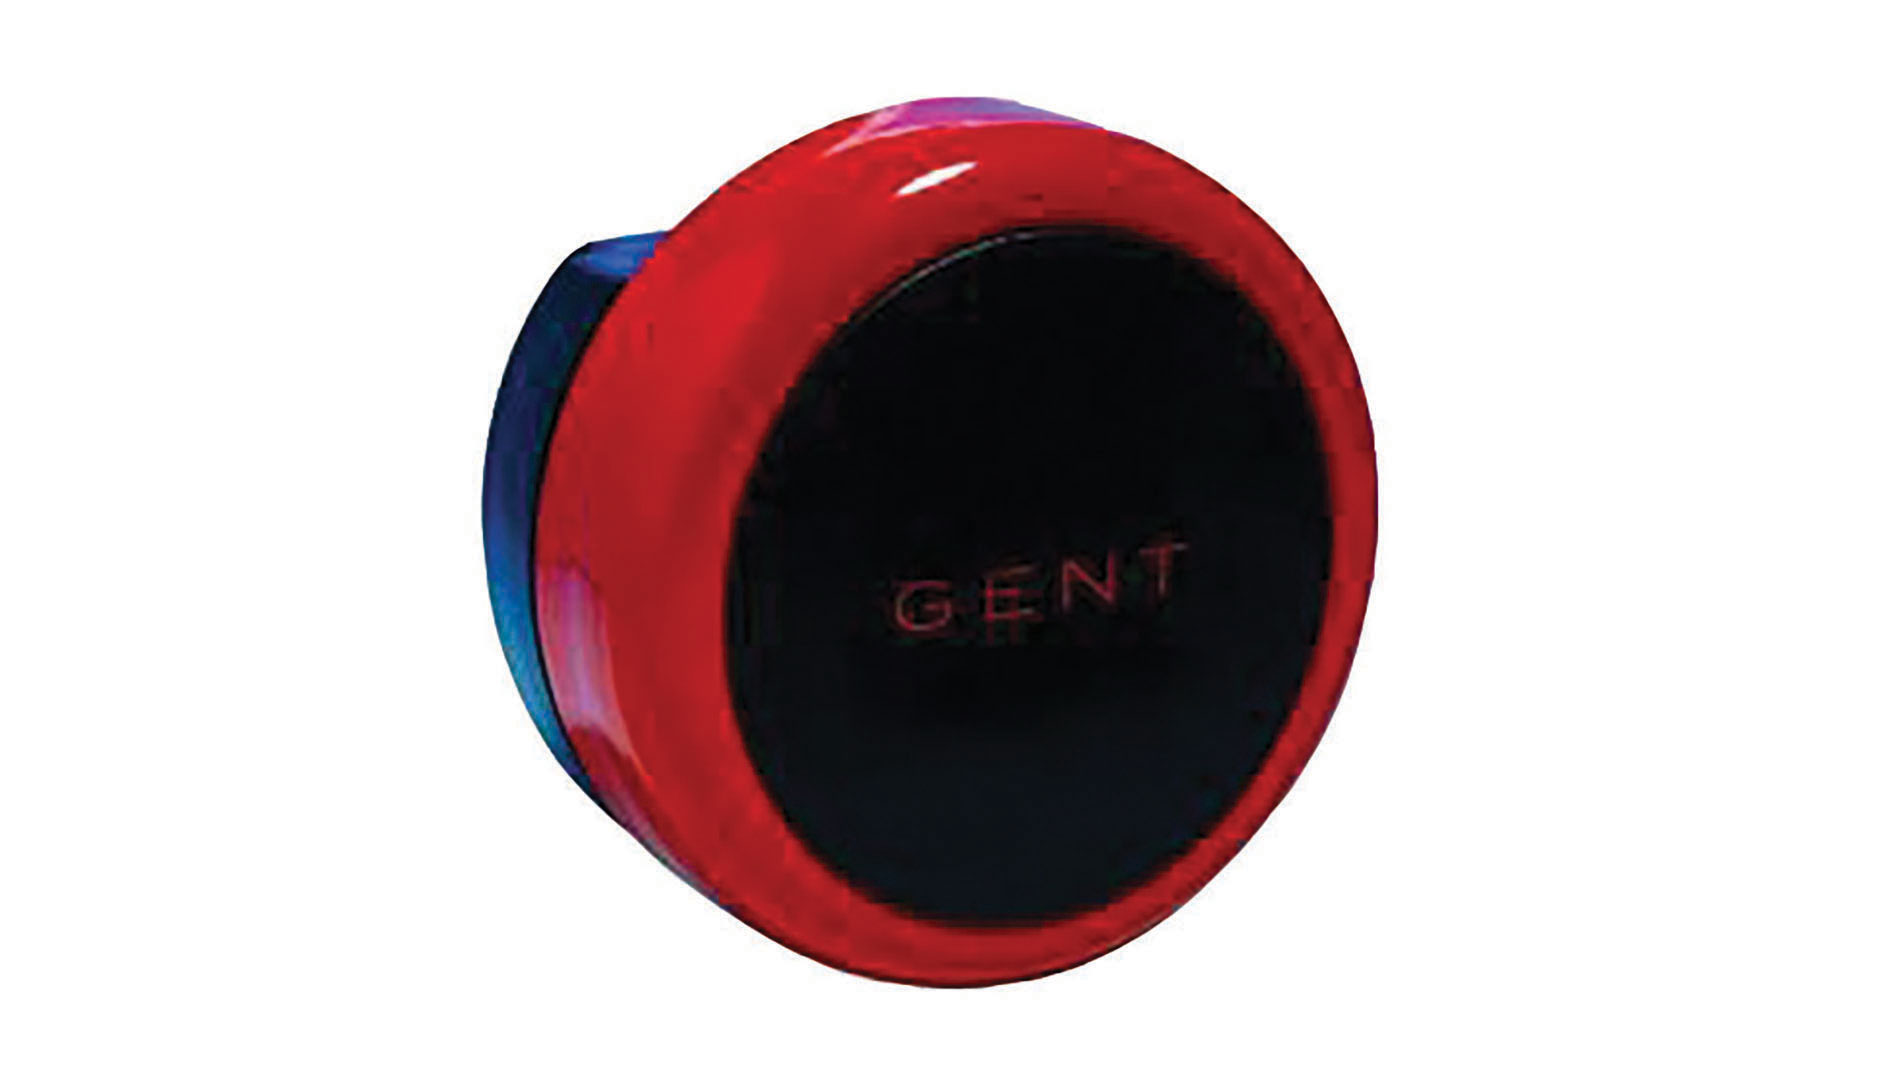 Blue and red bell labeled "Gent." Image by Honeywell.